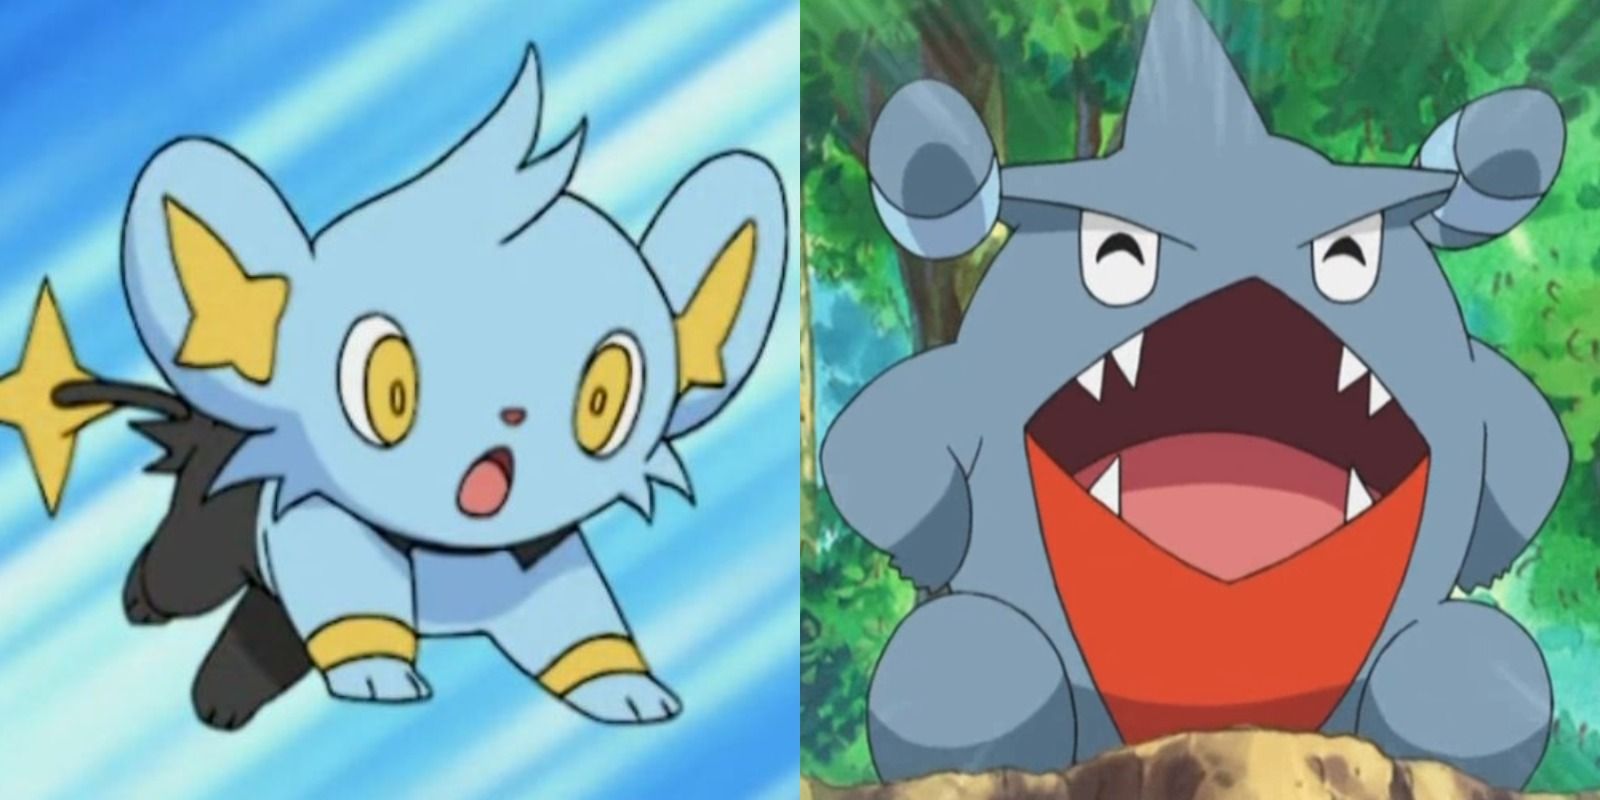 Split image of Shinx and Gible from Pokemon